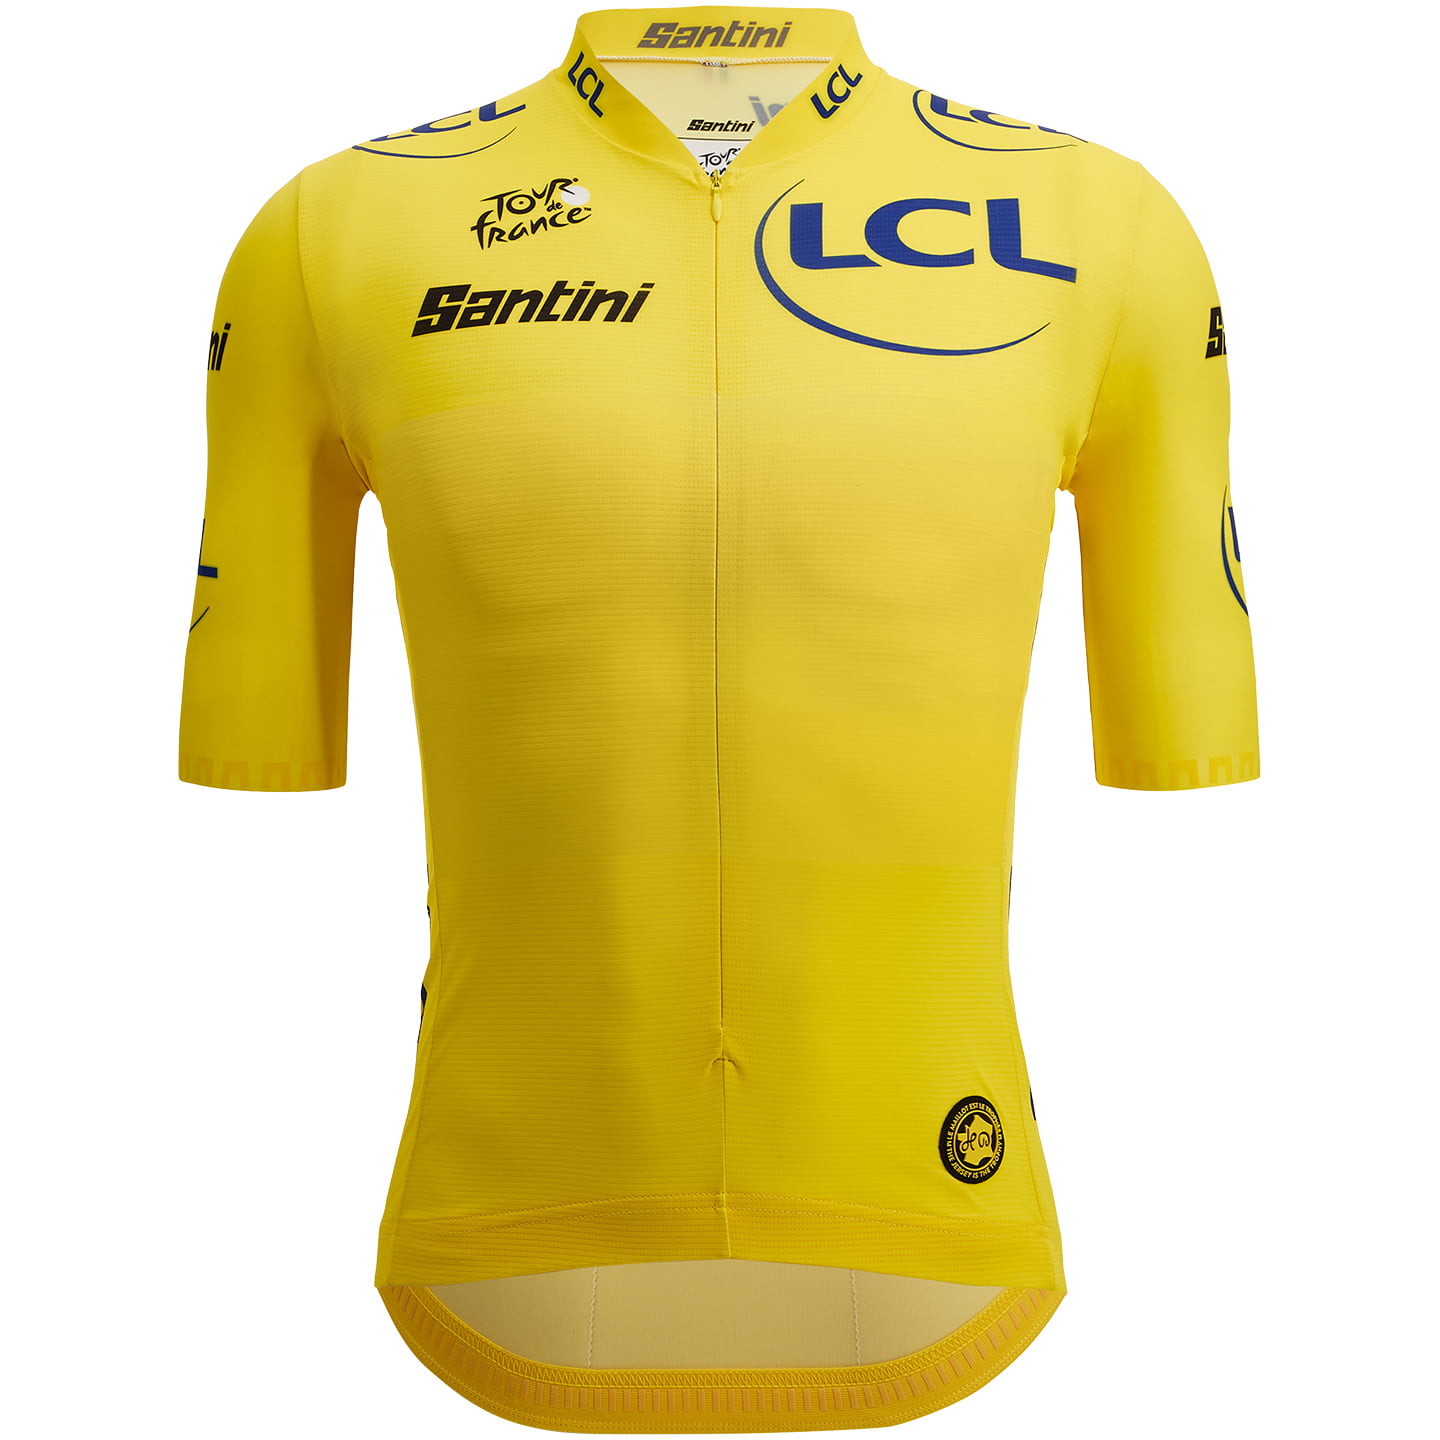 TOUR DE FRANCE Race Yellow Jersey 2022 Short Sleeve Jersey, for men, size L, Cycling shirt, Cycle clothing